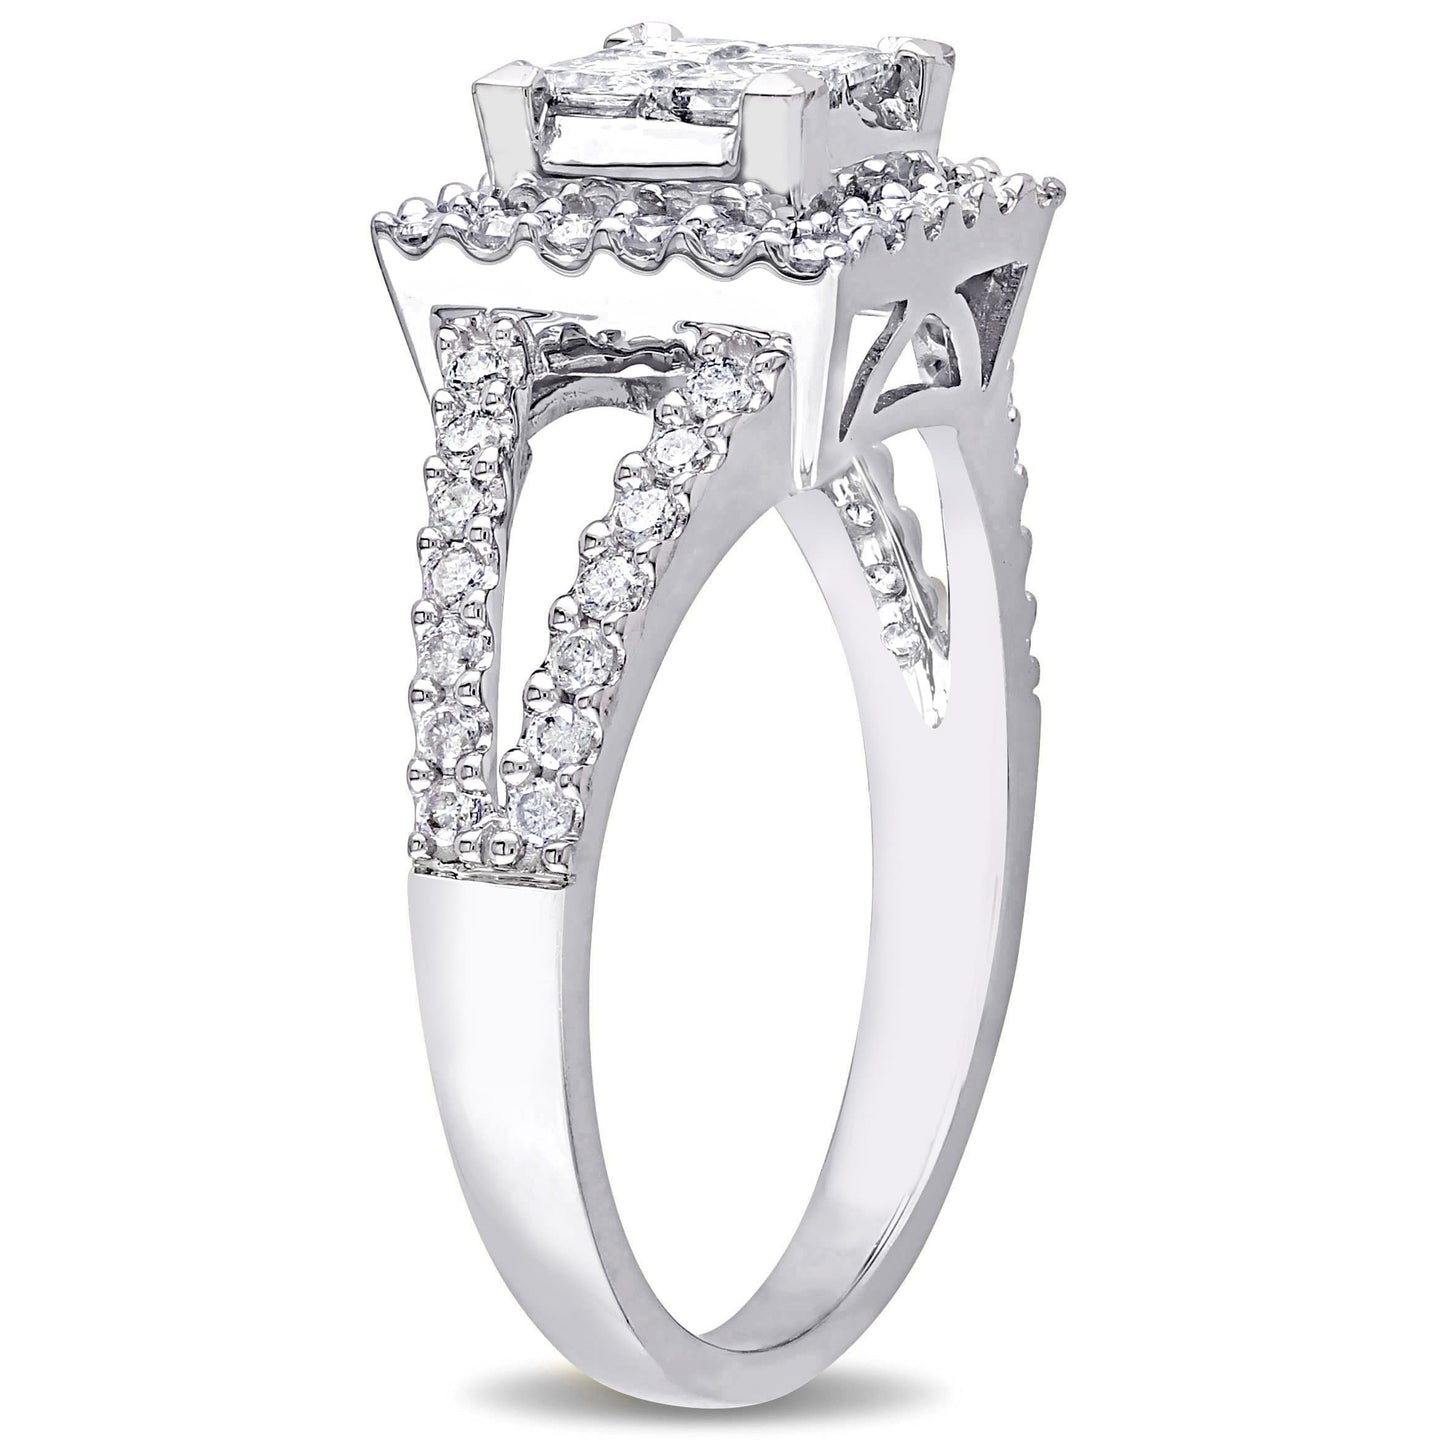 Julie Leah Diamond Halo Ring in 14k White Gold